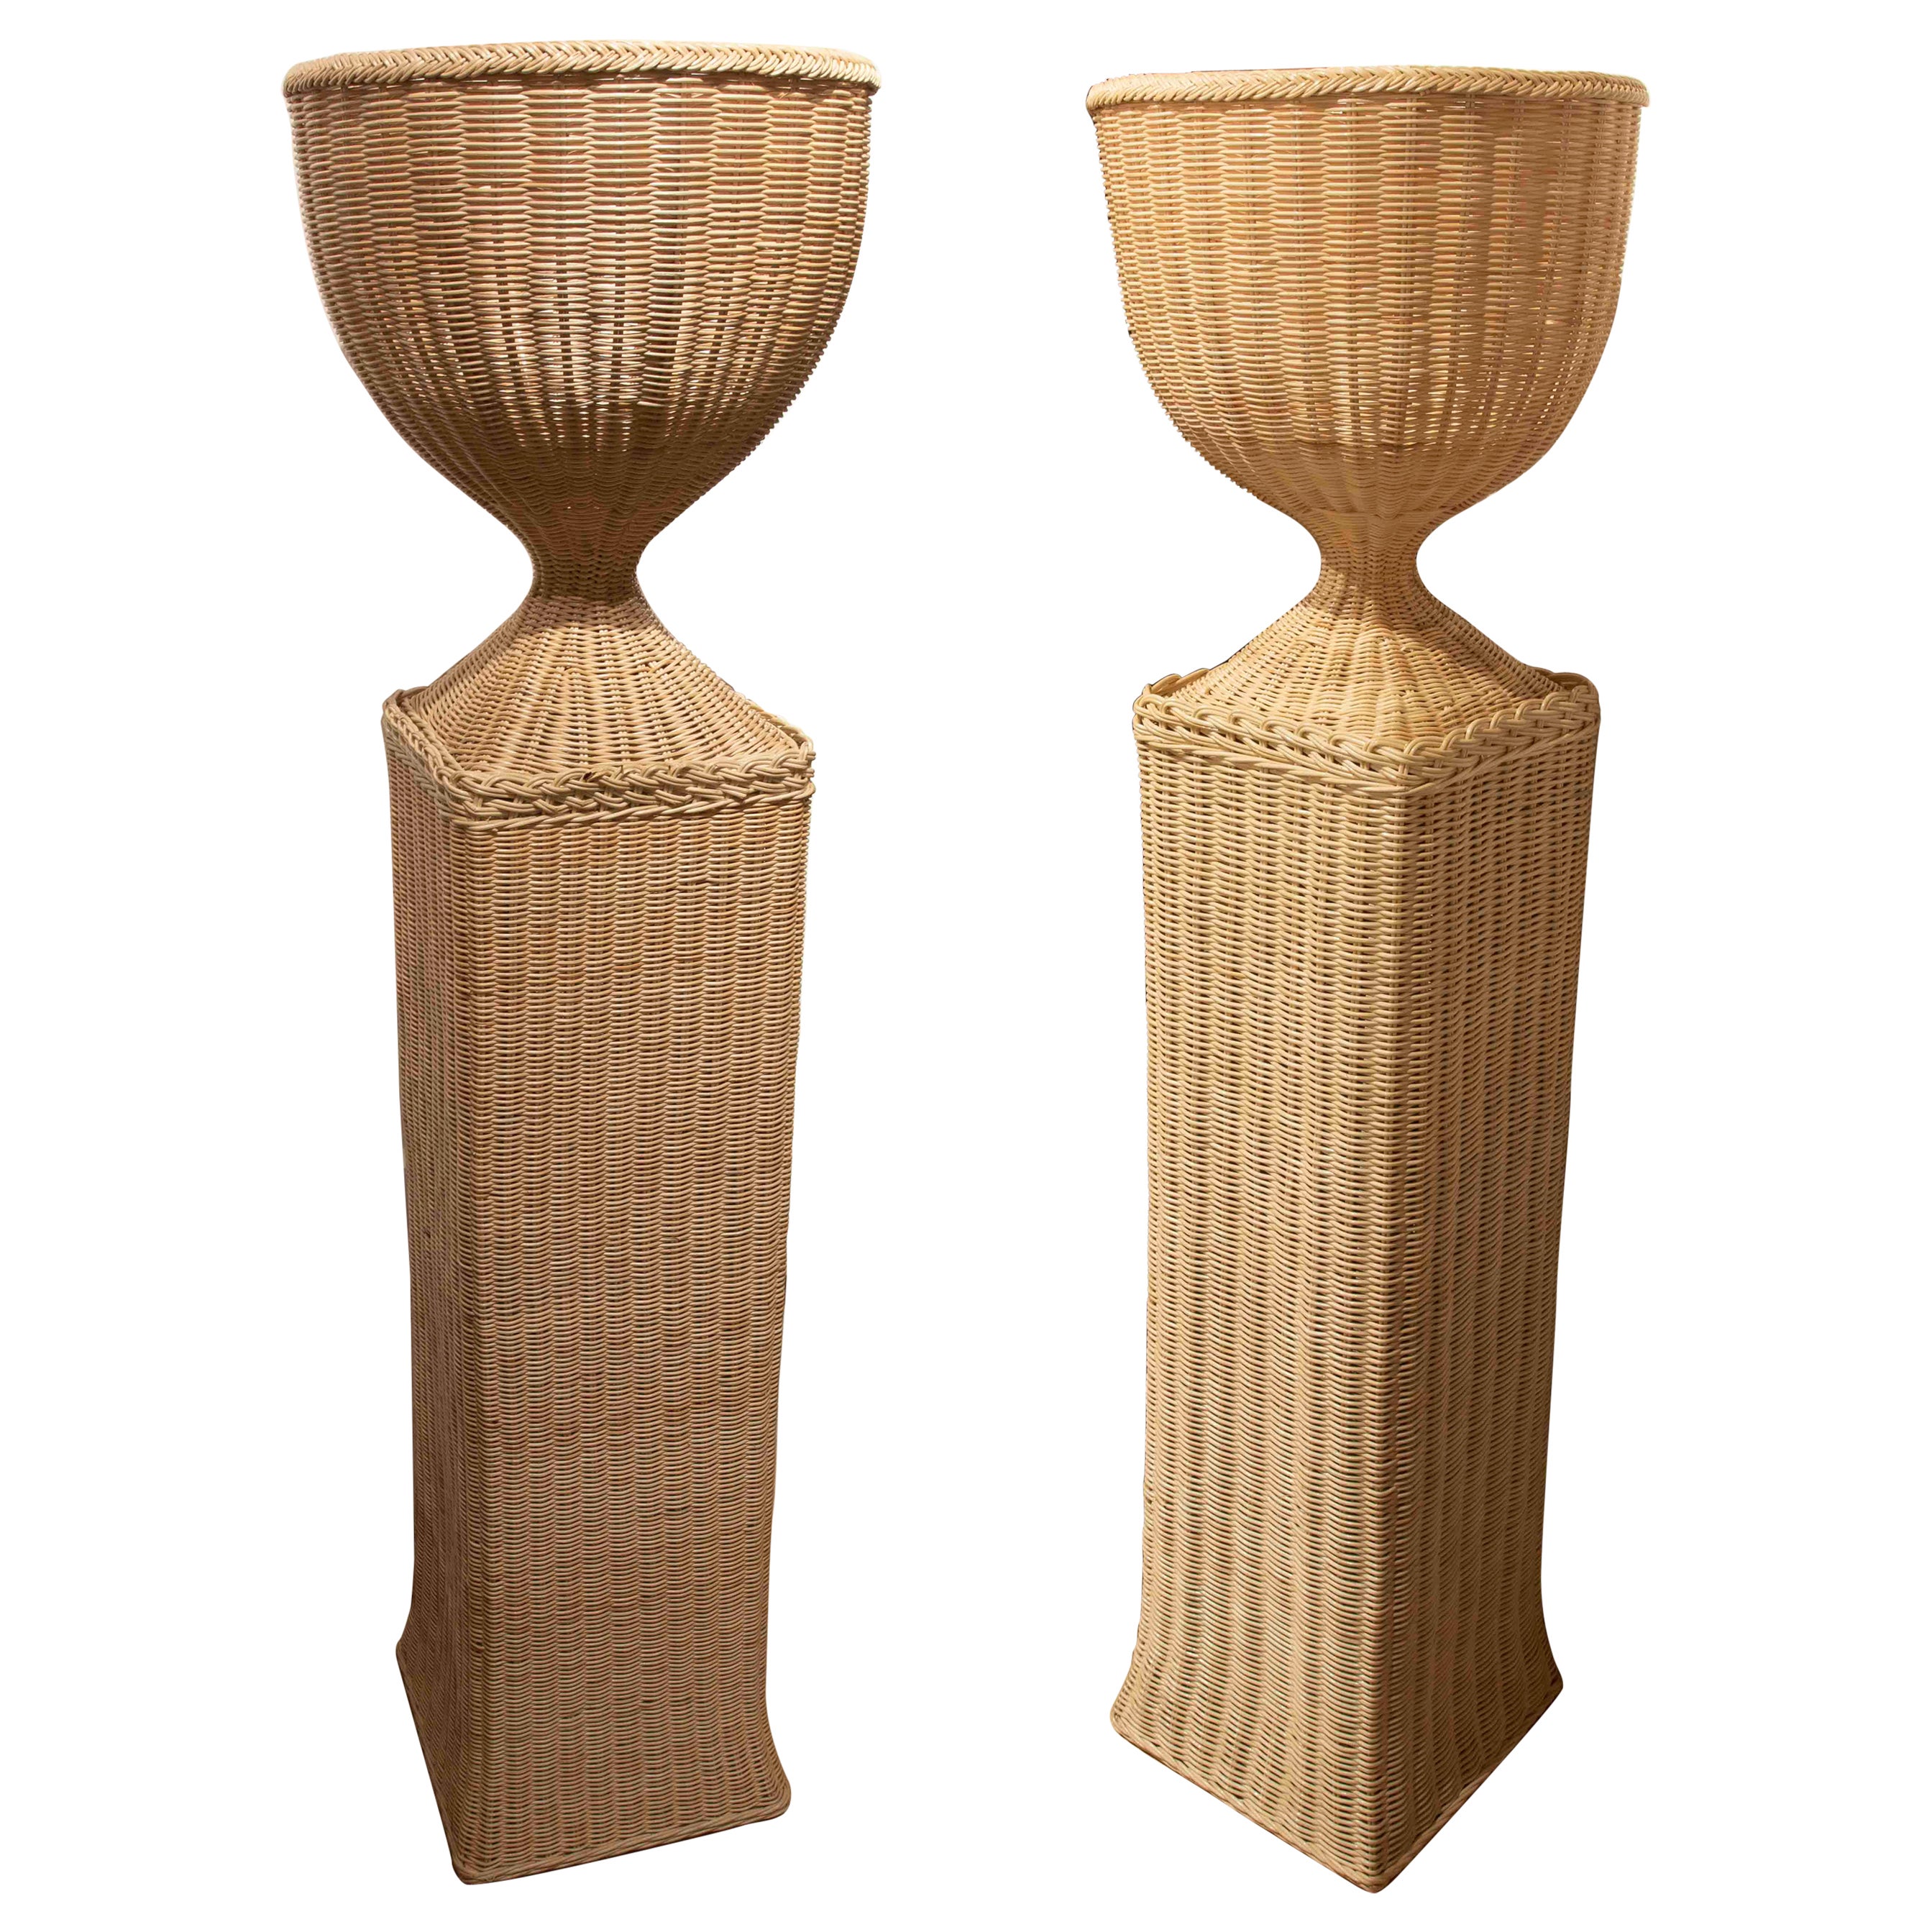 Pair of Handmade Wicker Cups with Rectangular Bases and wooden Structure